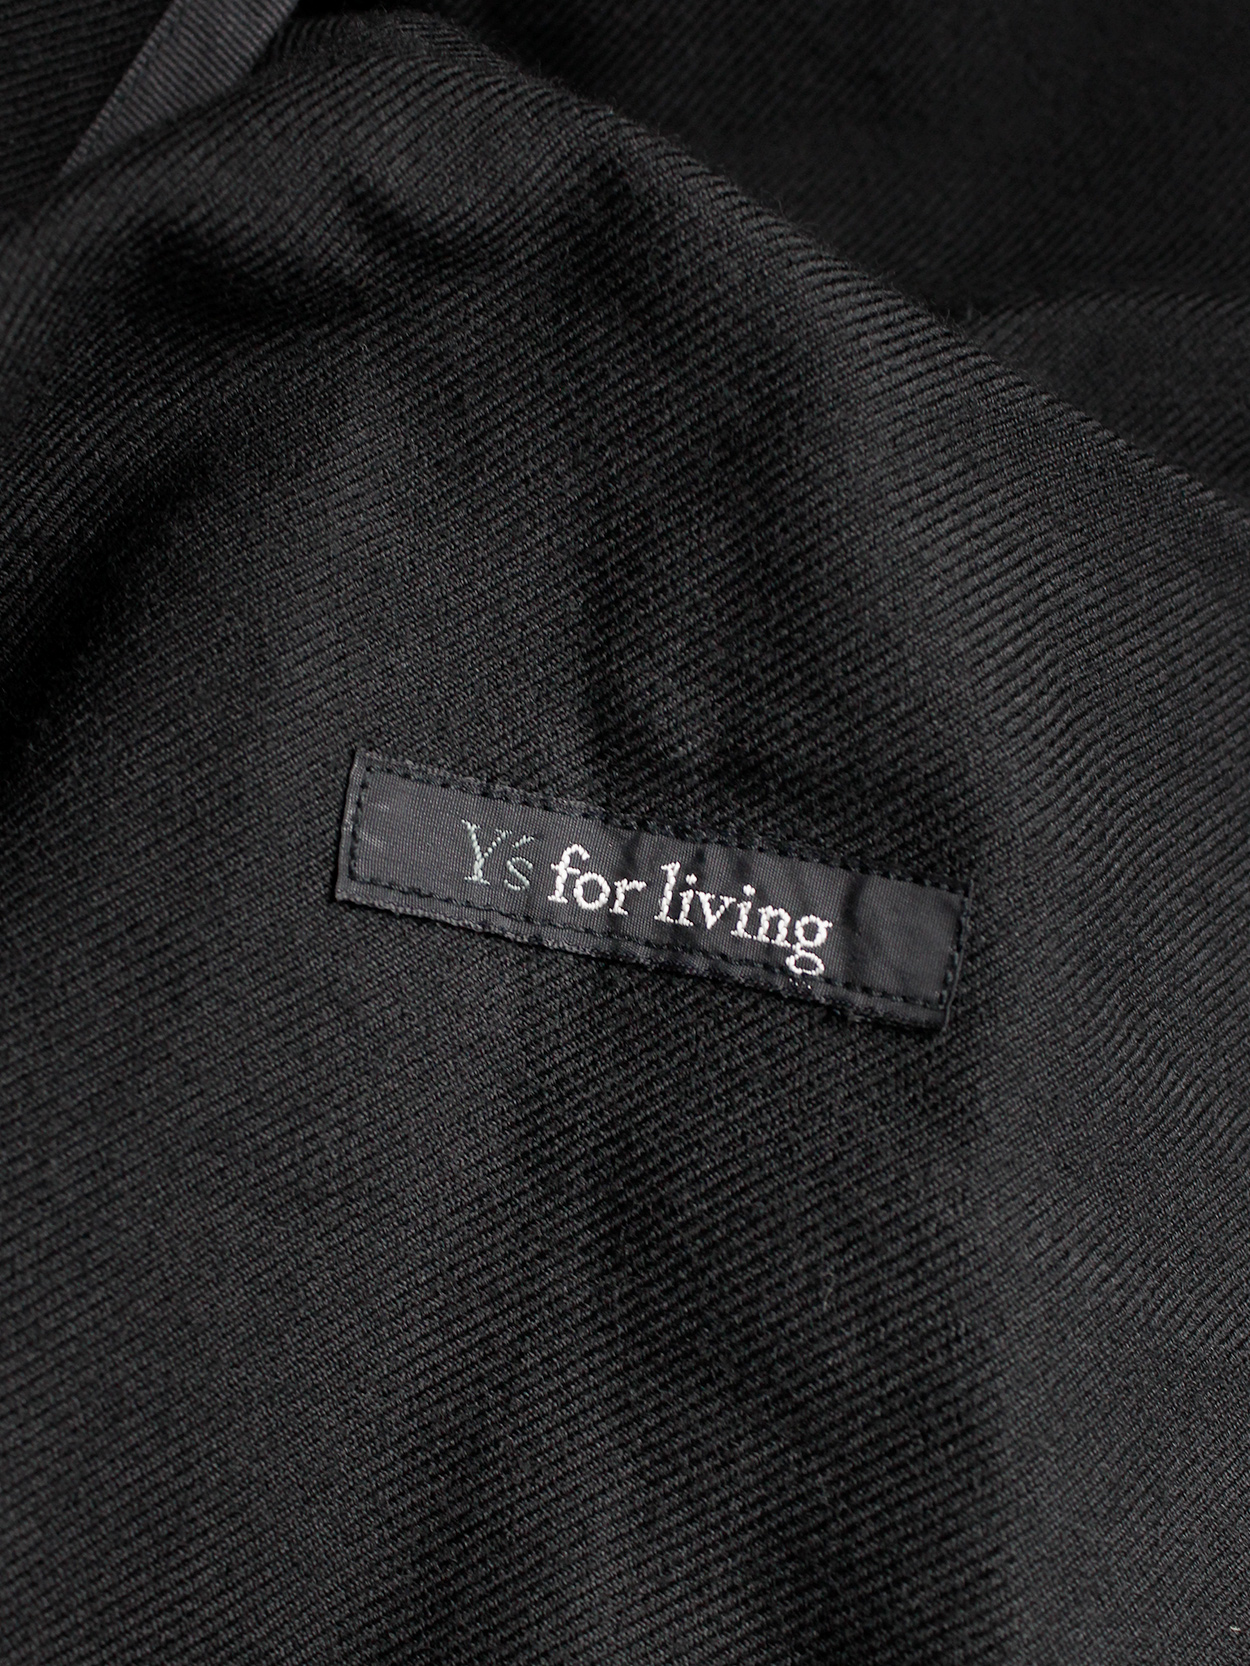 Y's for living dark blue shawl cardigan or jacket with oversized safety ...